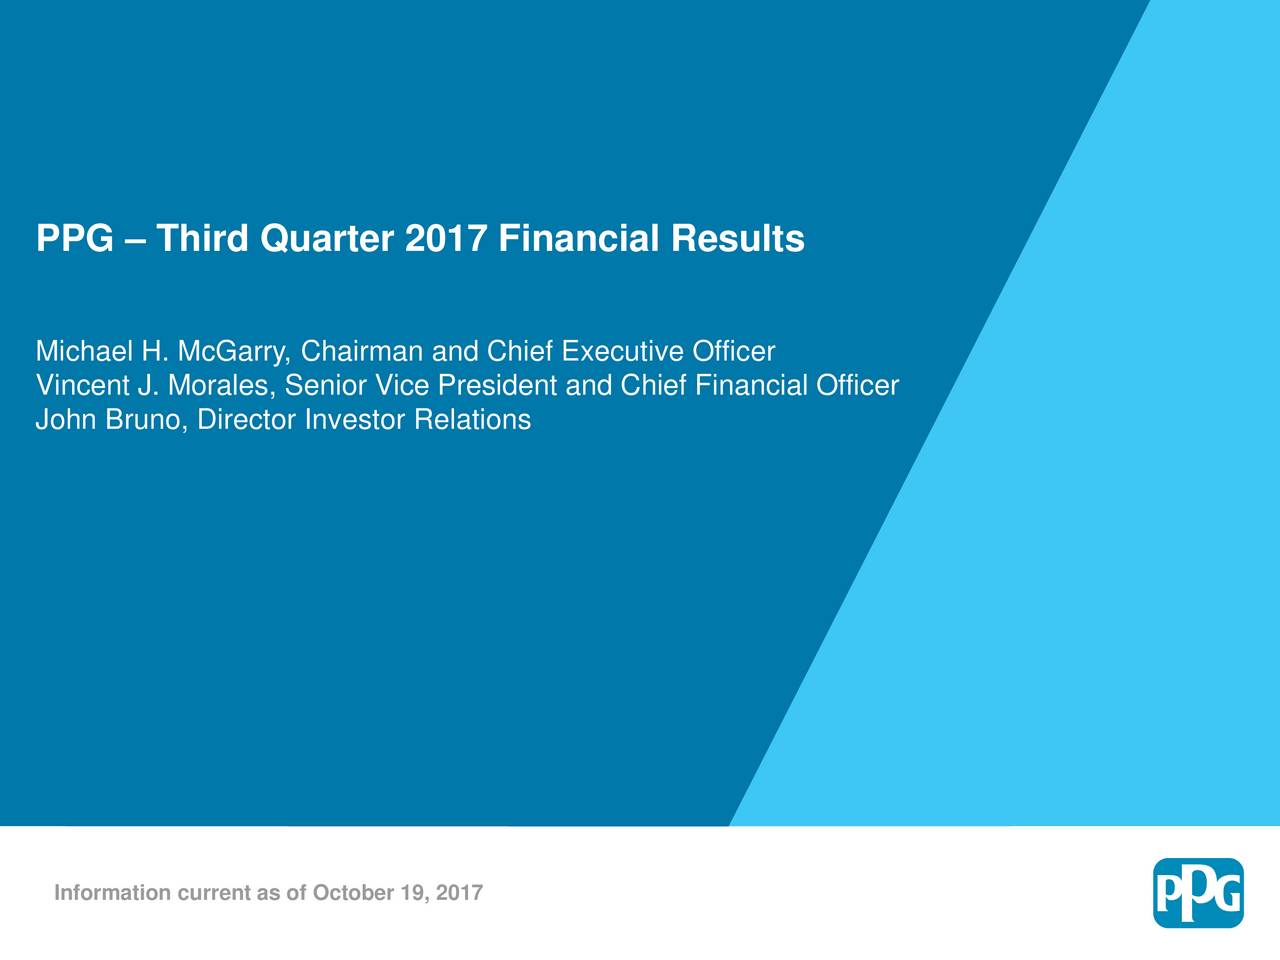 Michael H. McGarry, Chairman and Chief Executive Officer Vincent J. Morales, Senior Vice President and Chief Financial Officer John Bruno, Director Investor Relations Information current as of October 19, 2017